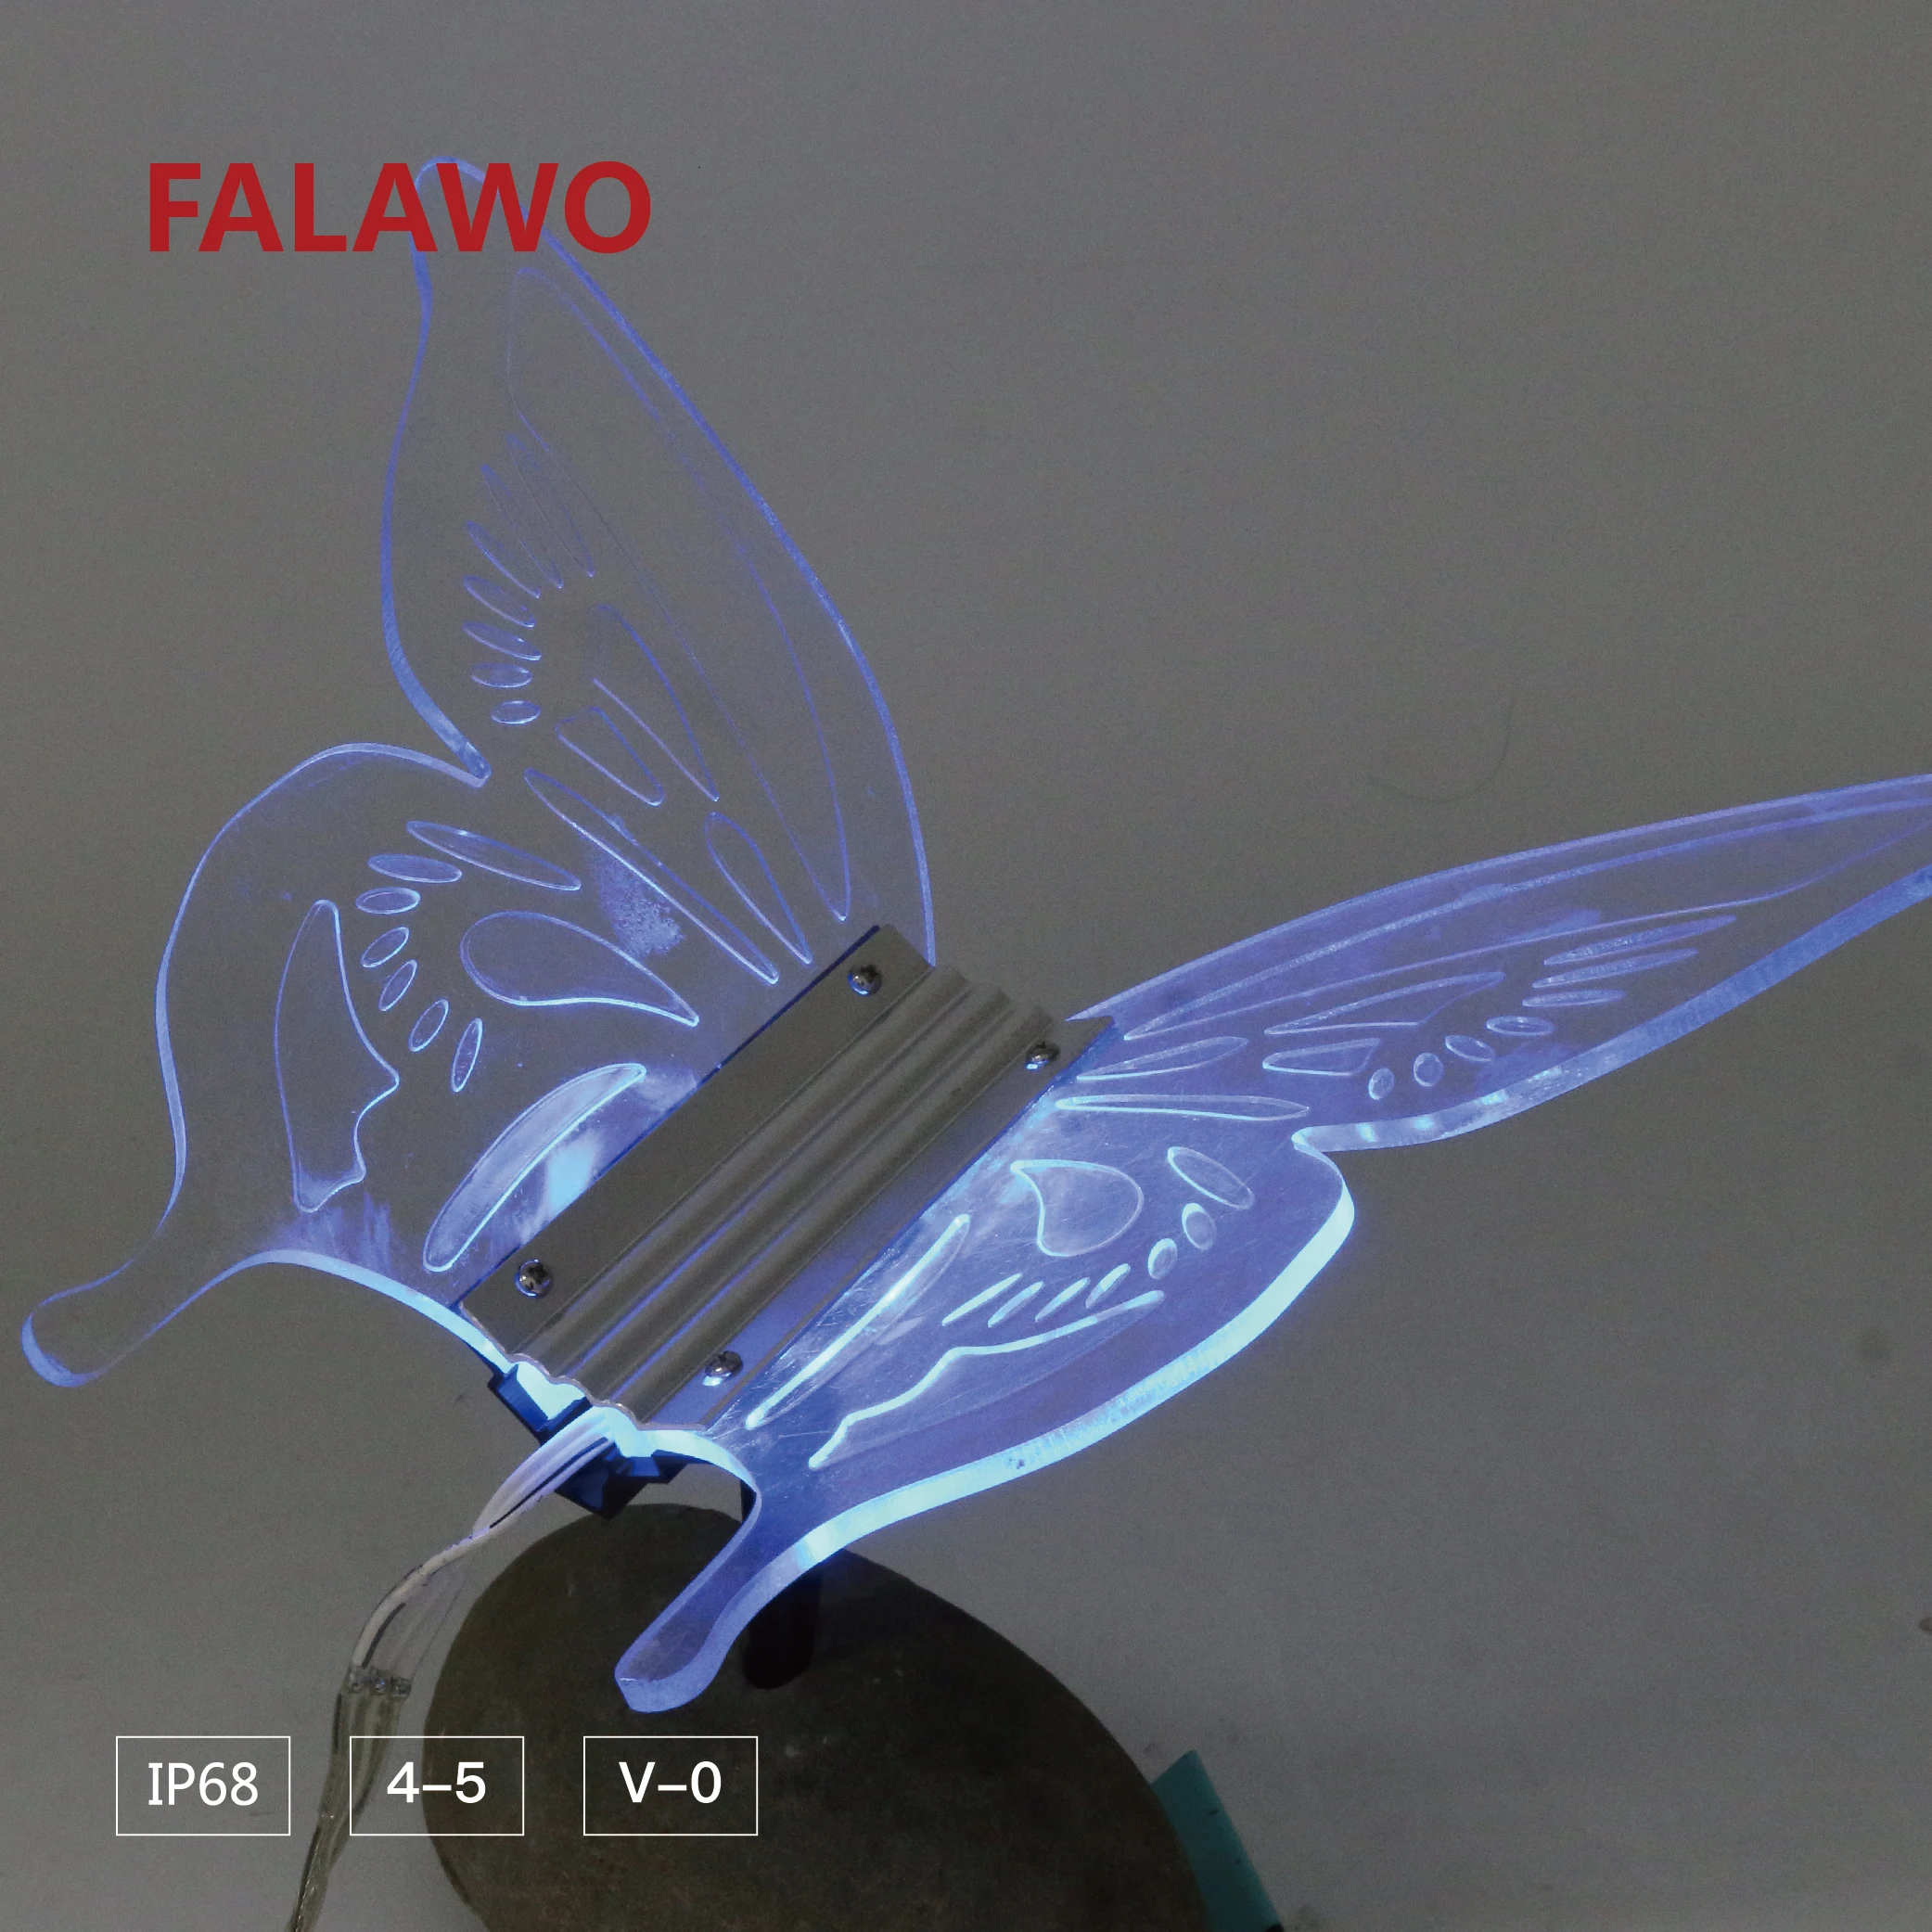 Falawo IP68 RGB outdoor waterproof butterfly LED lights Christmas